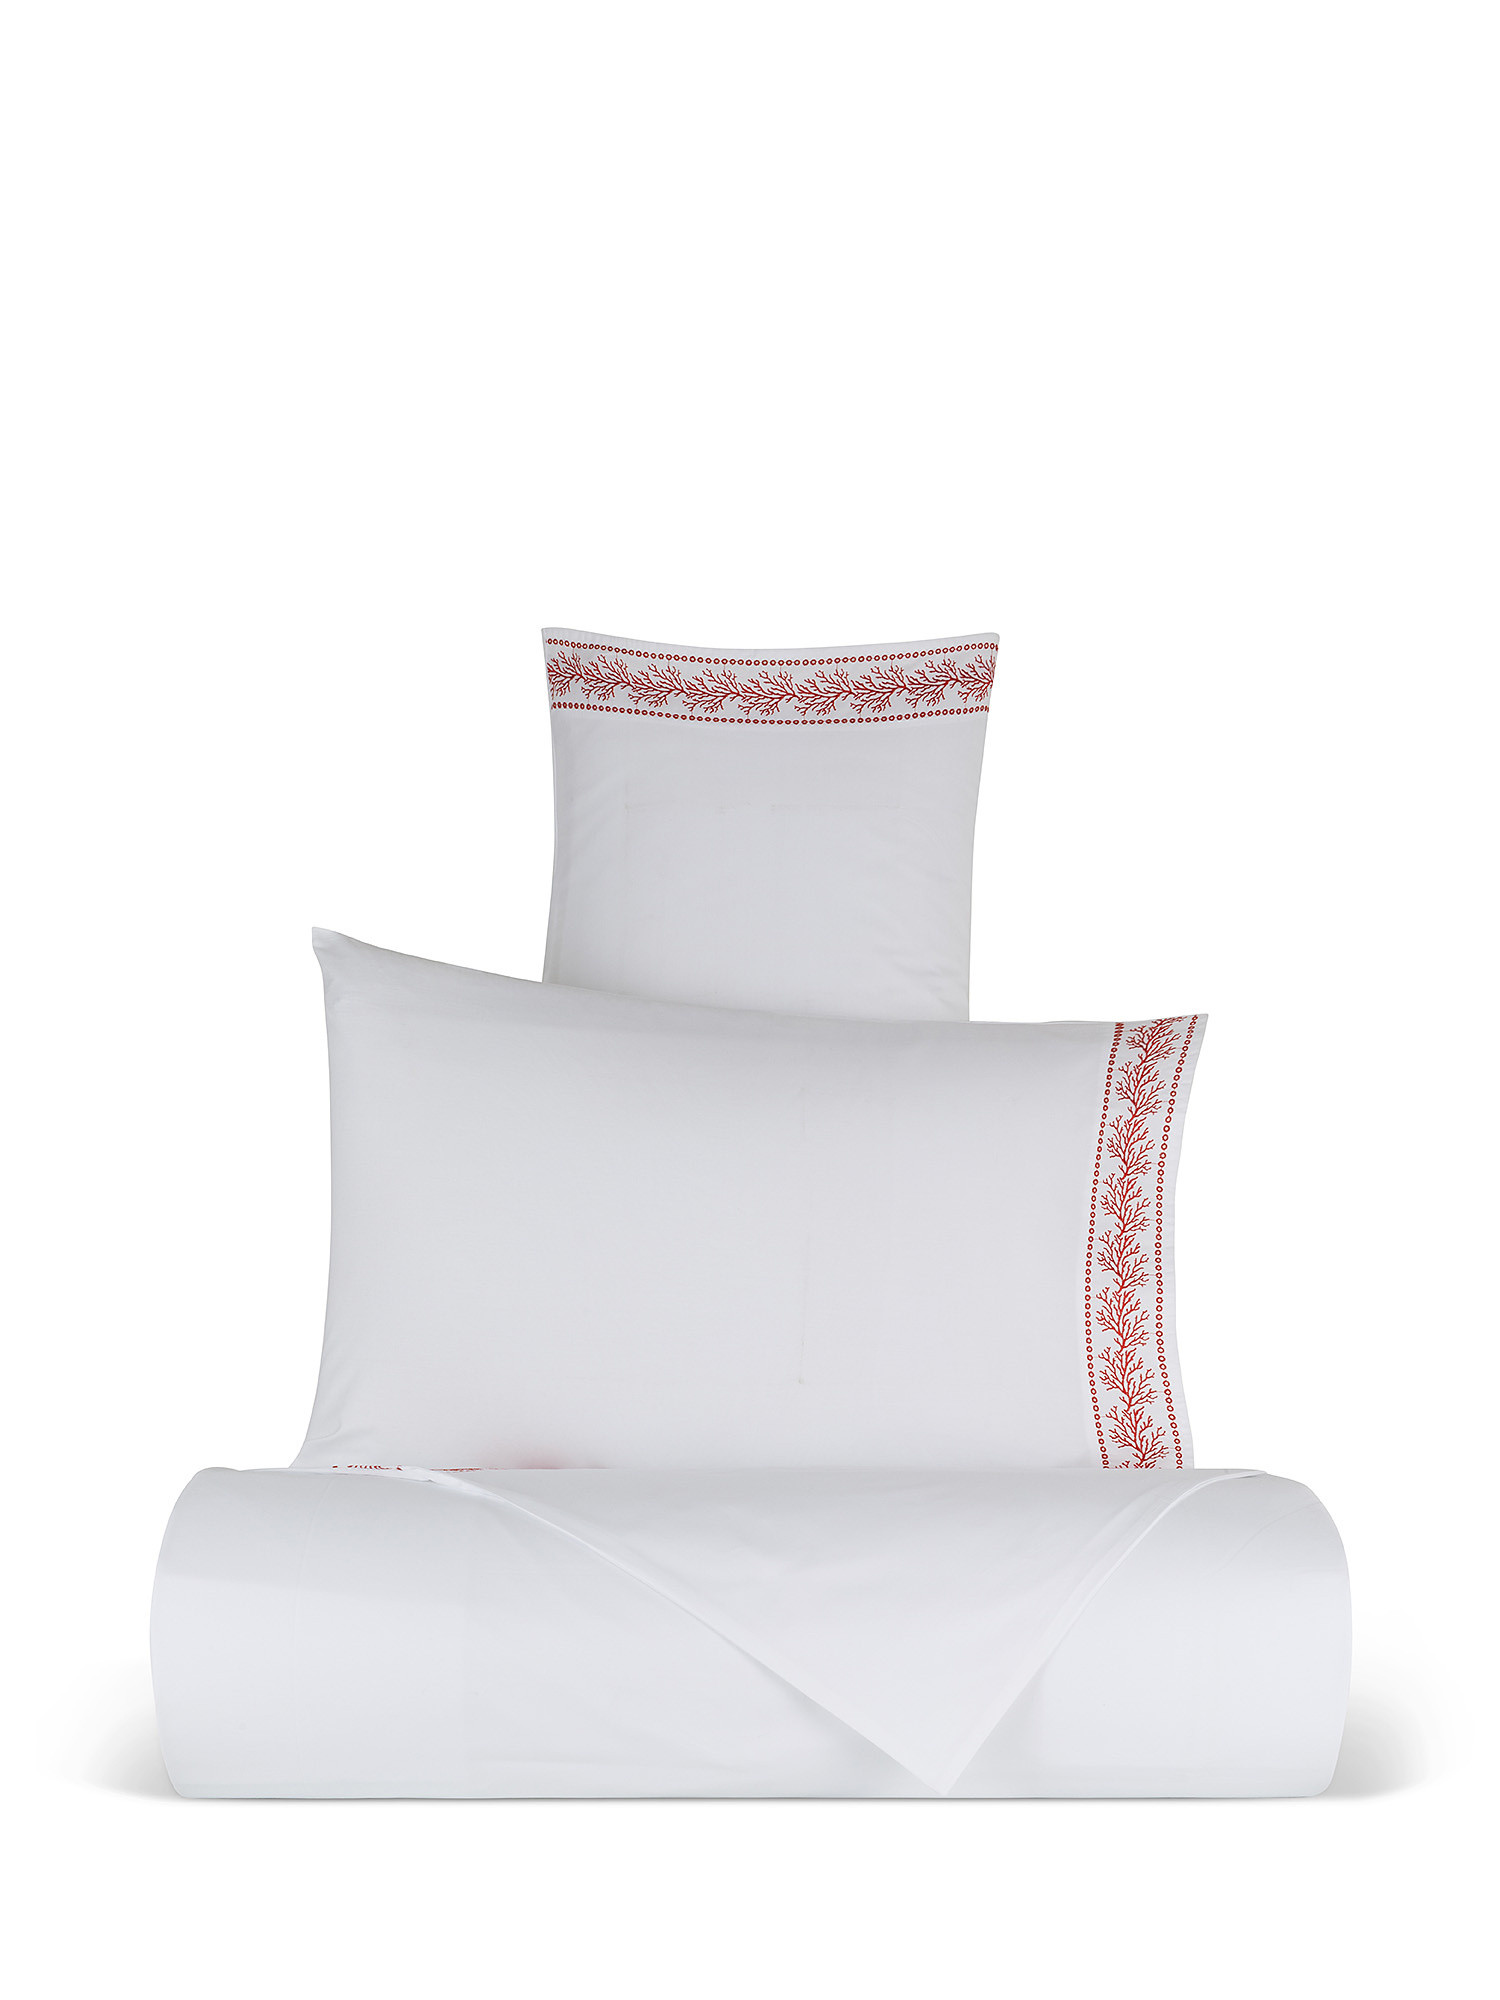 Duvet cover in cotton percale with coral embroidery, Red, large image number 0